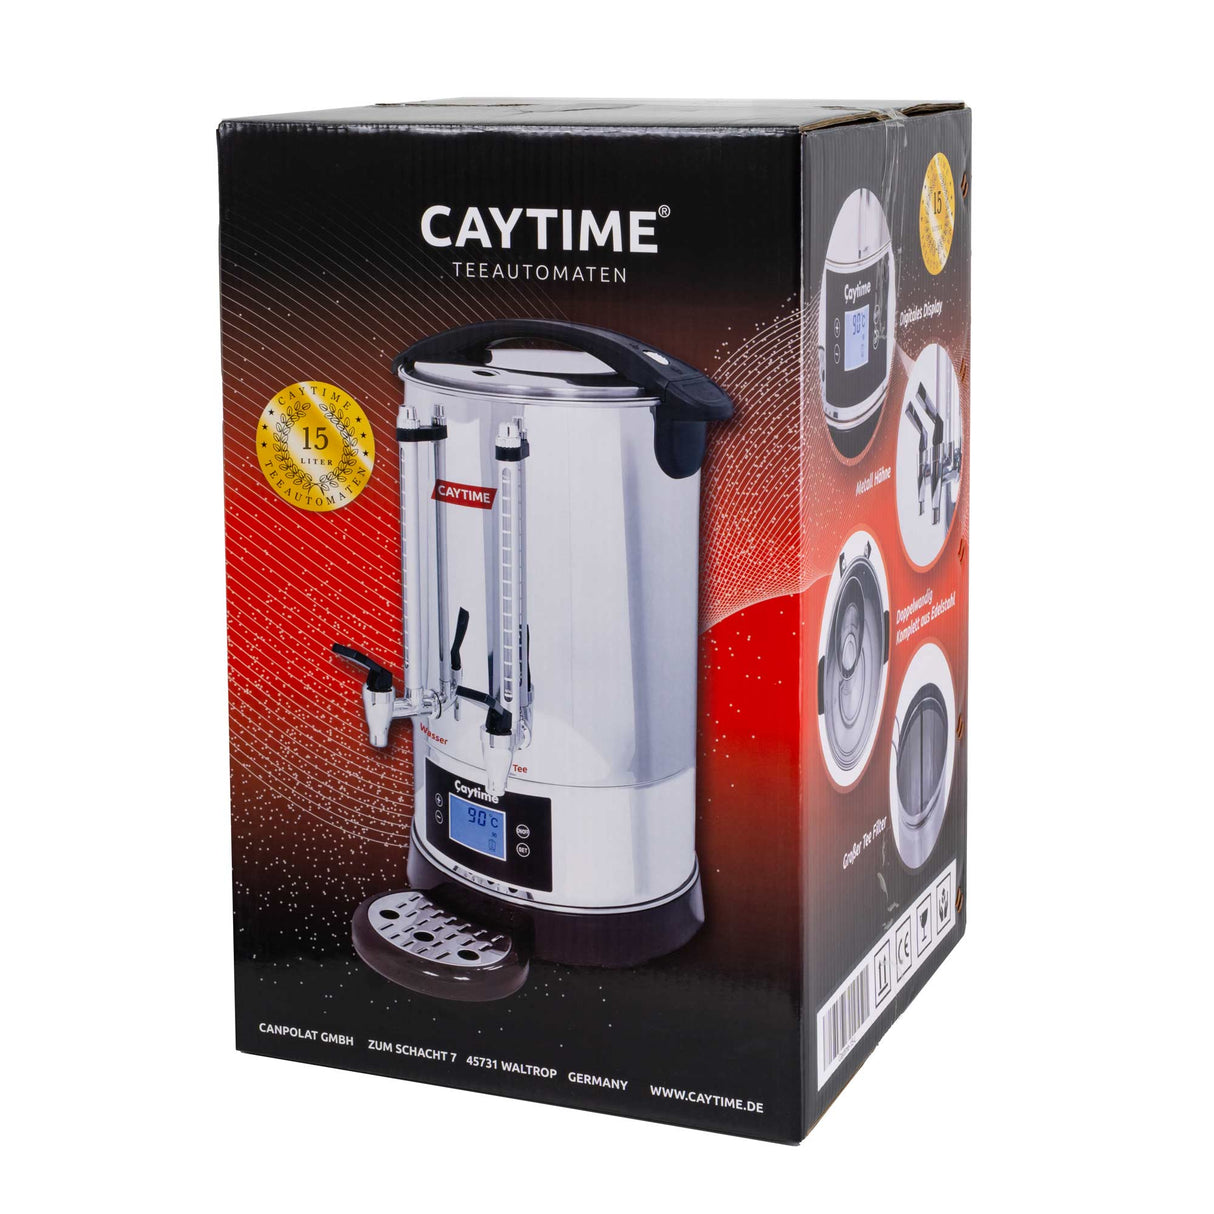 Caytime Teeautomat 15 Liter Digital Doppelwand Isolierung D15 Caytime - CPGASTRO